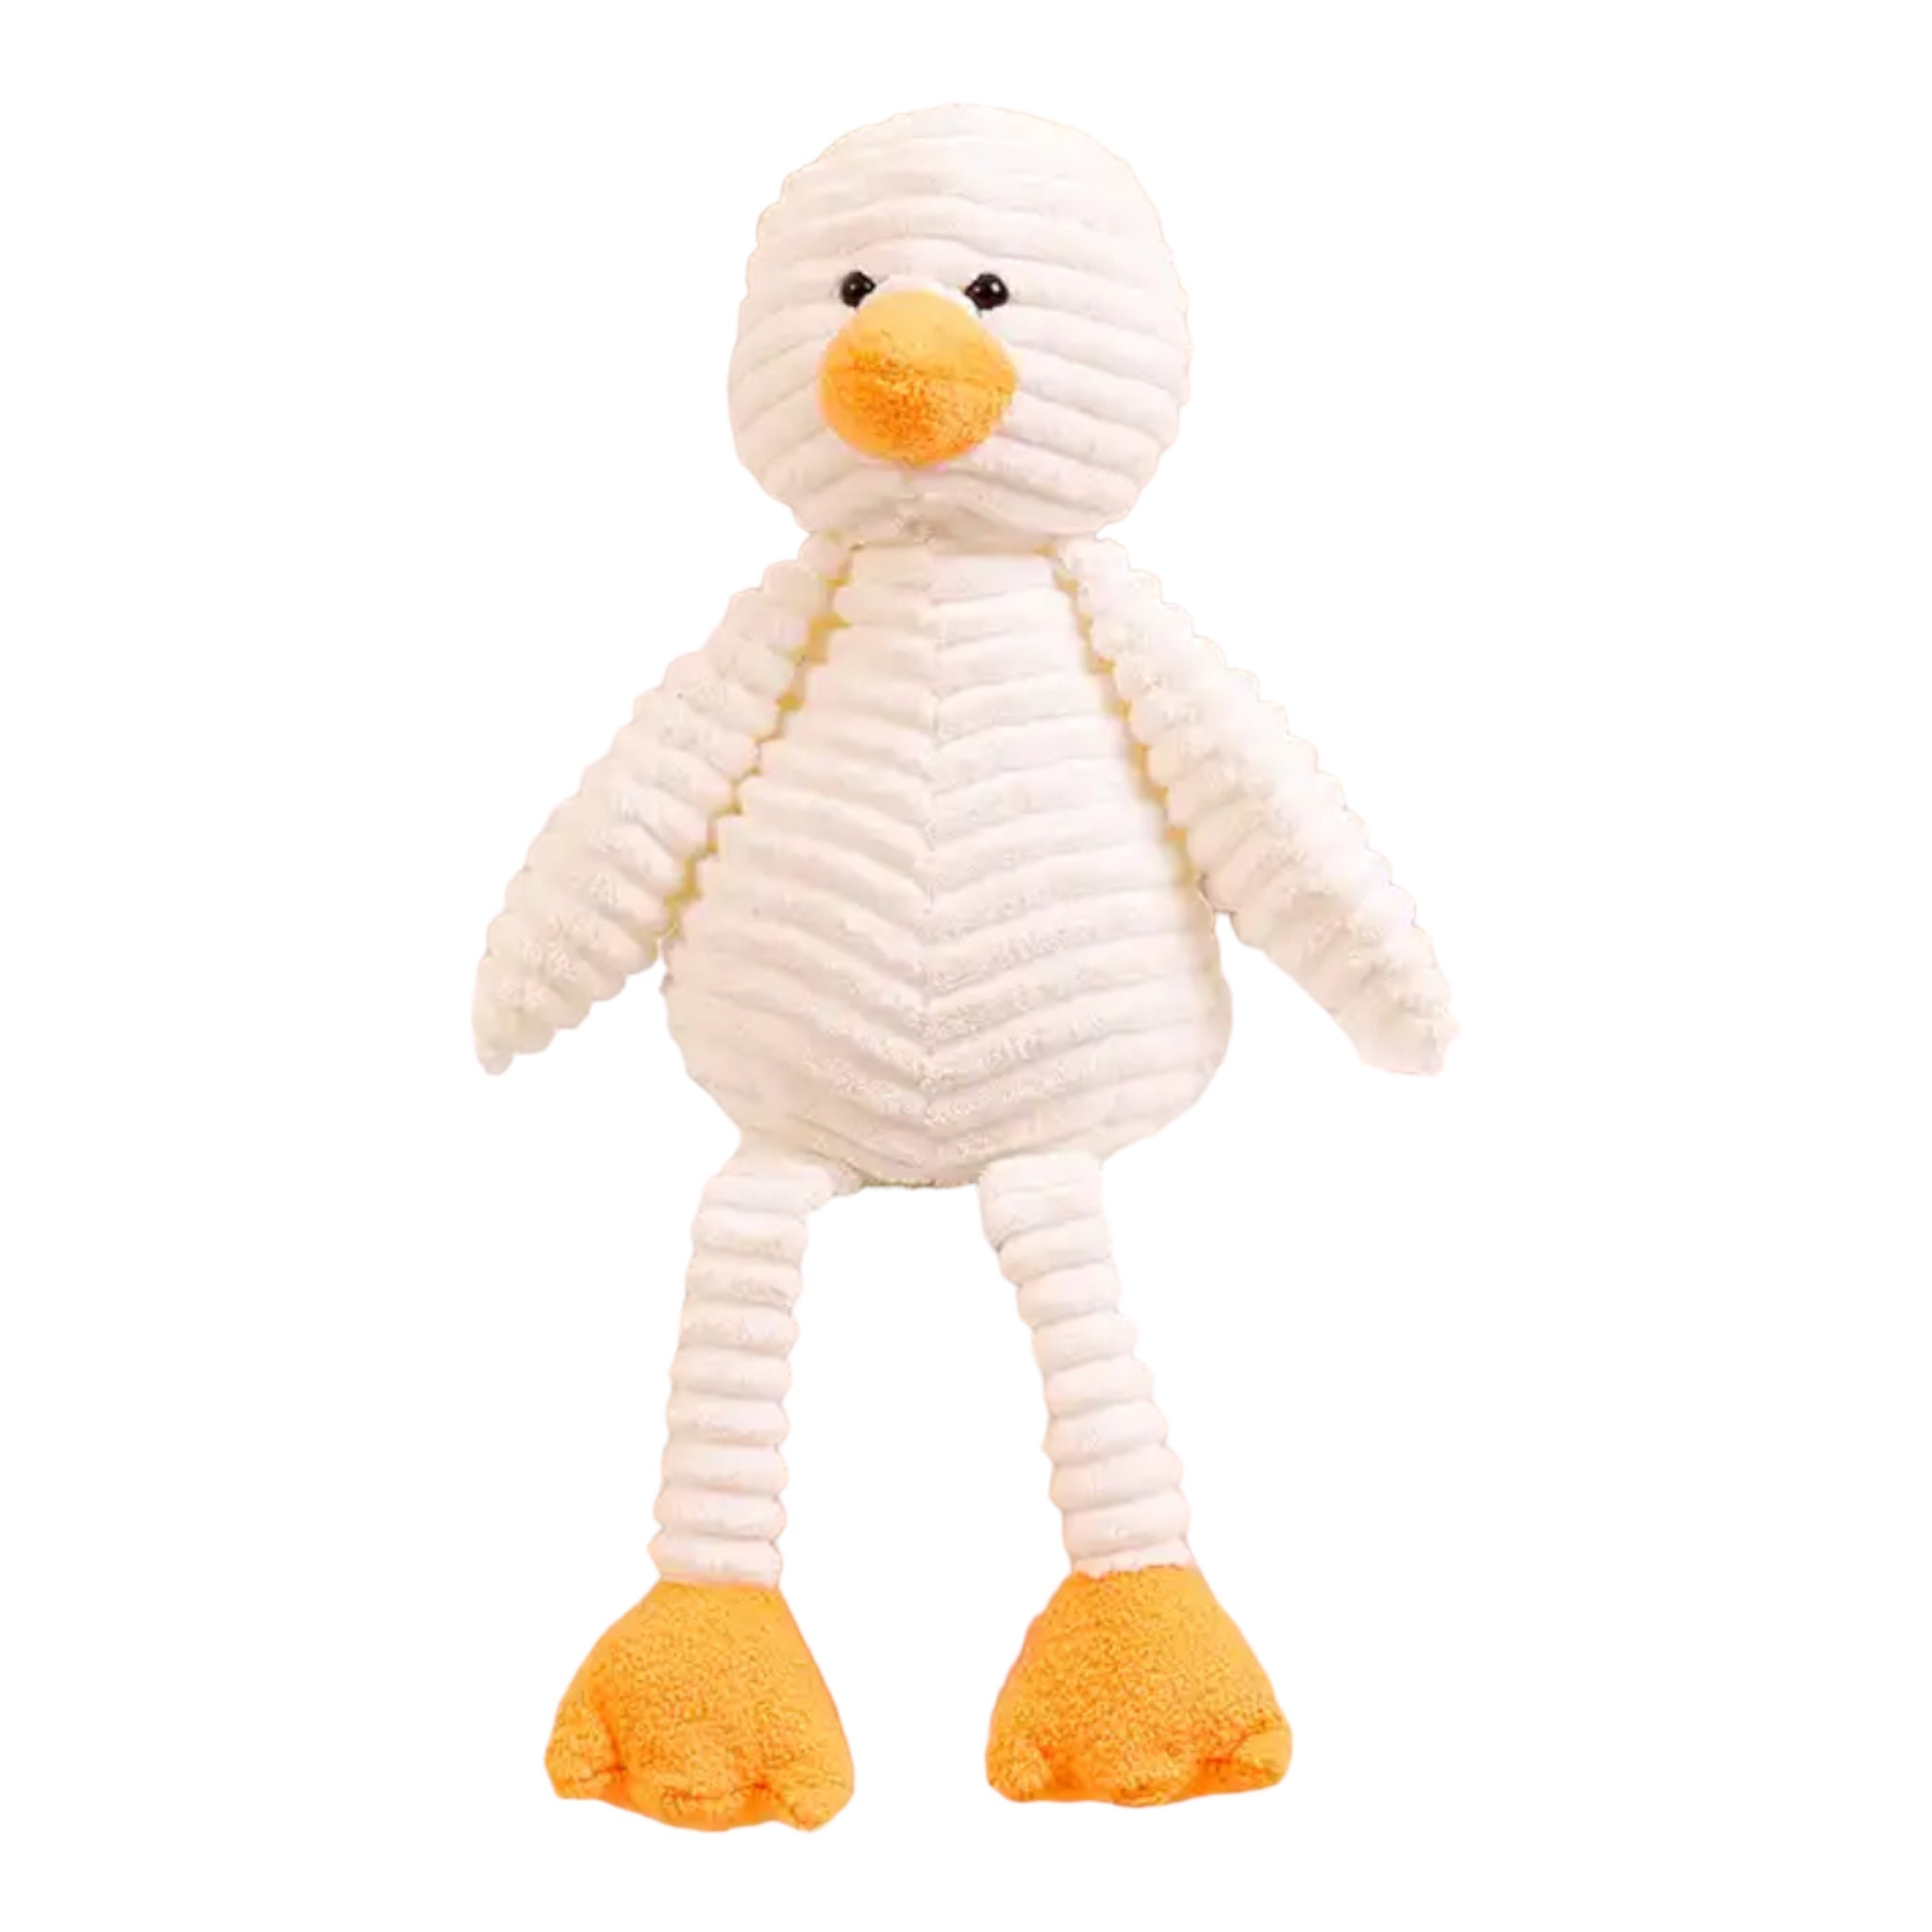 Ducky-Toy-inna-carton-gift-ideas-gifts-Birthday-best-shop-online-Dubai-UAE-for-her-customized-Shops-UAE-supplier-shop-package-packaging-1  820 × 820px  Ducky Soft Toy, shop the best Christmas gift gifts for her for him from Inna carton online store dubai, UAE!